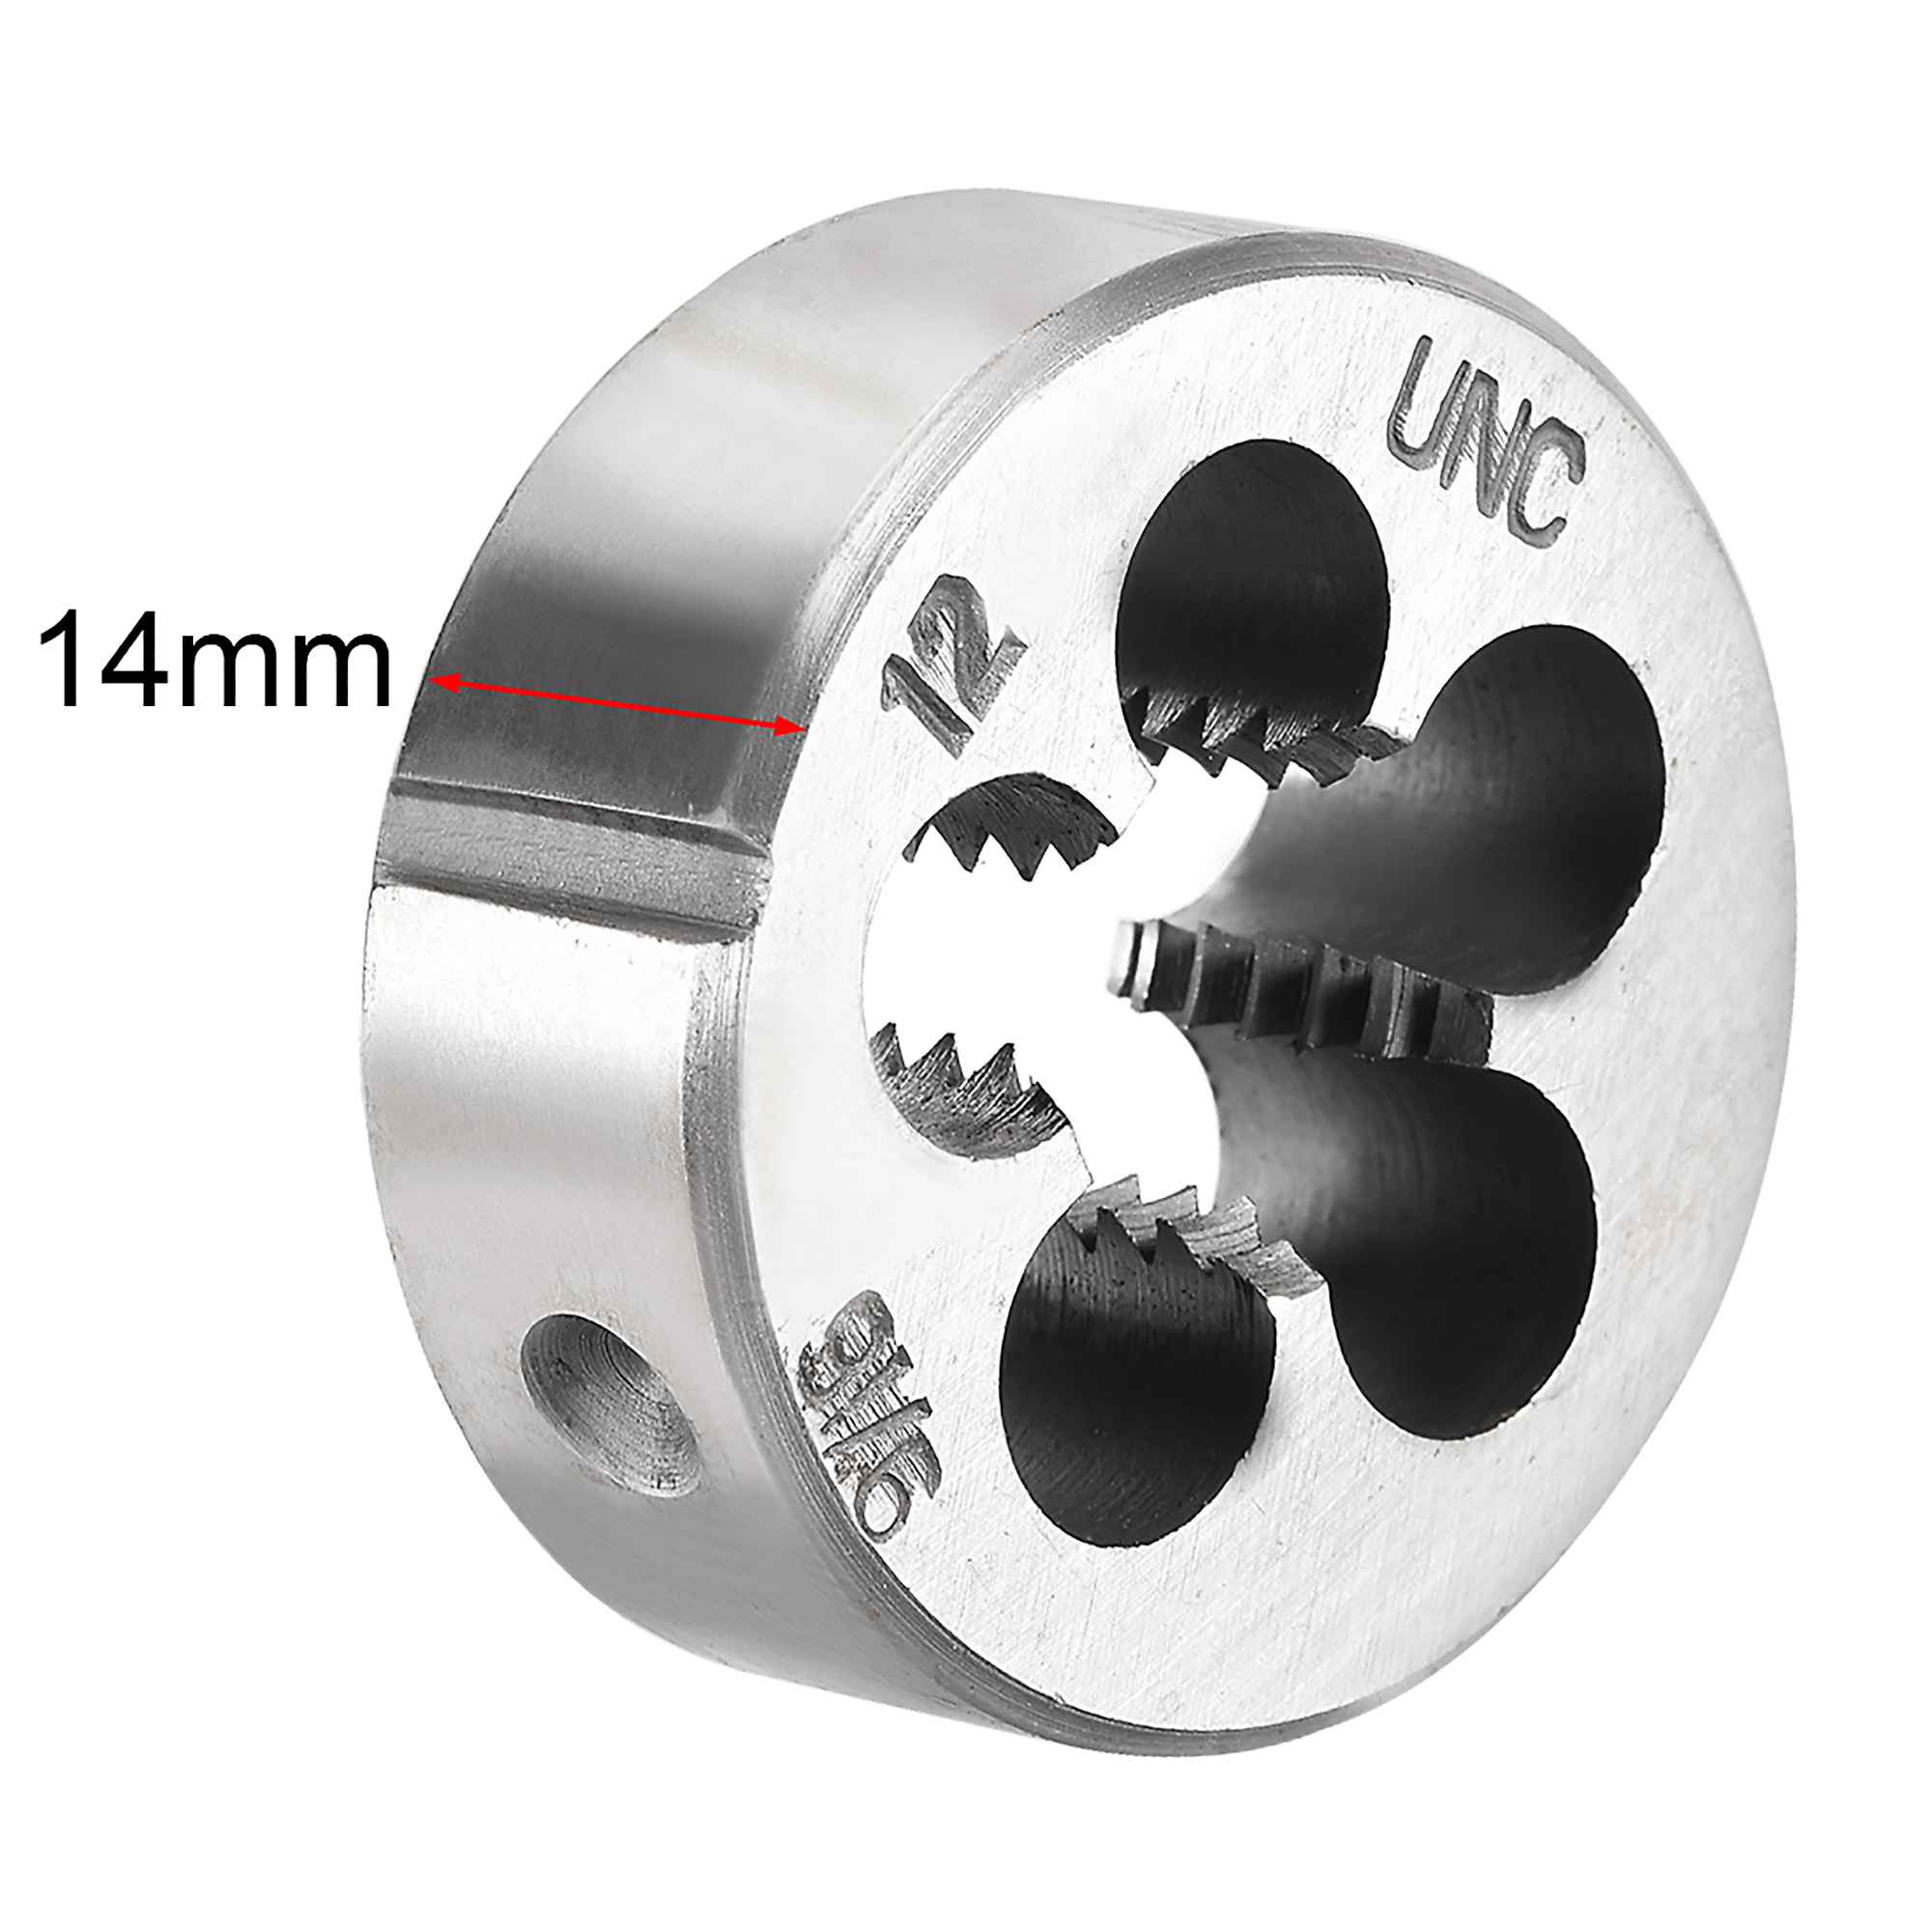 Uxcell 9/16-12 UNC Alloy Tool Steel Machine Thread Round Threading Dies 2 Pack - image 3 of 3